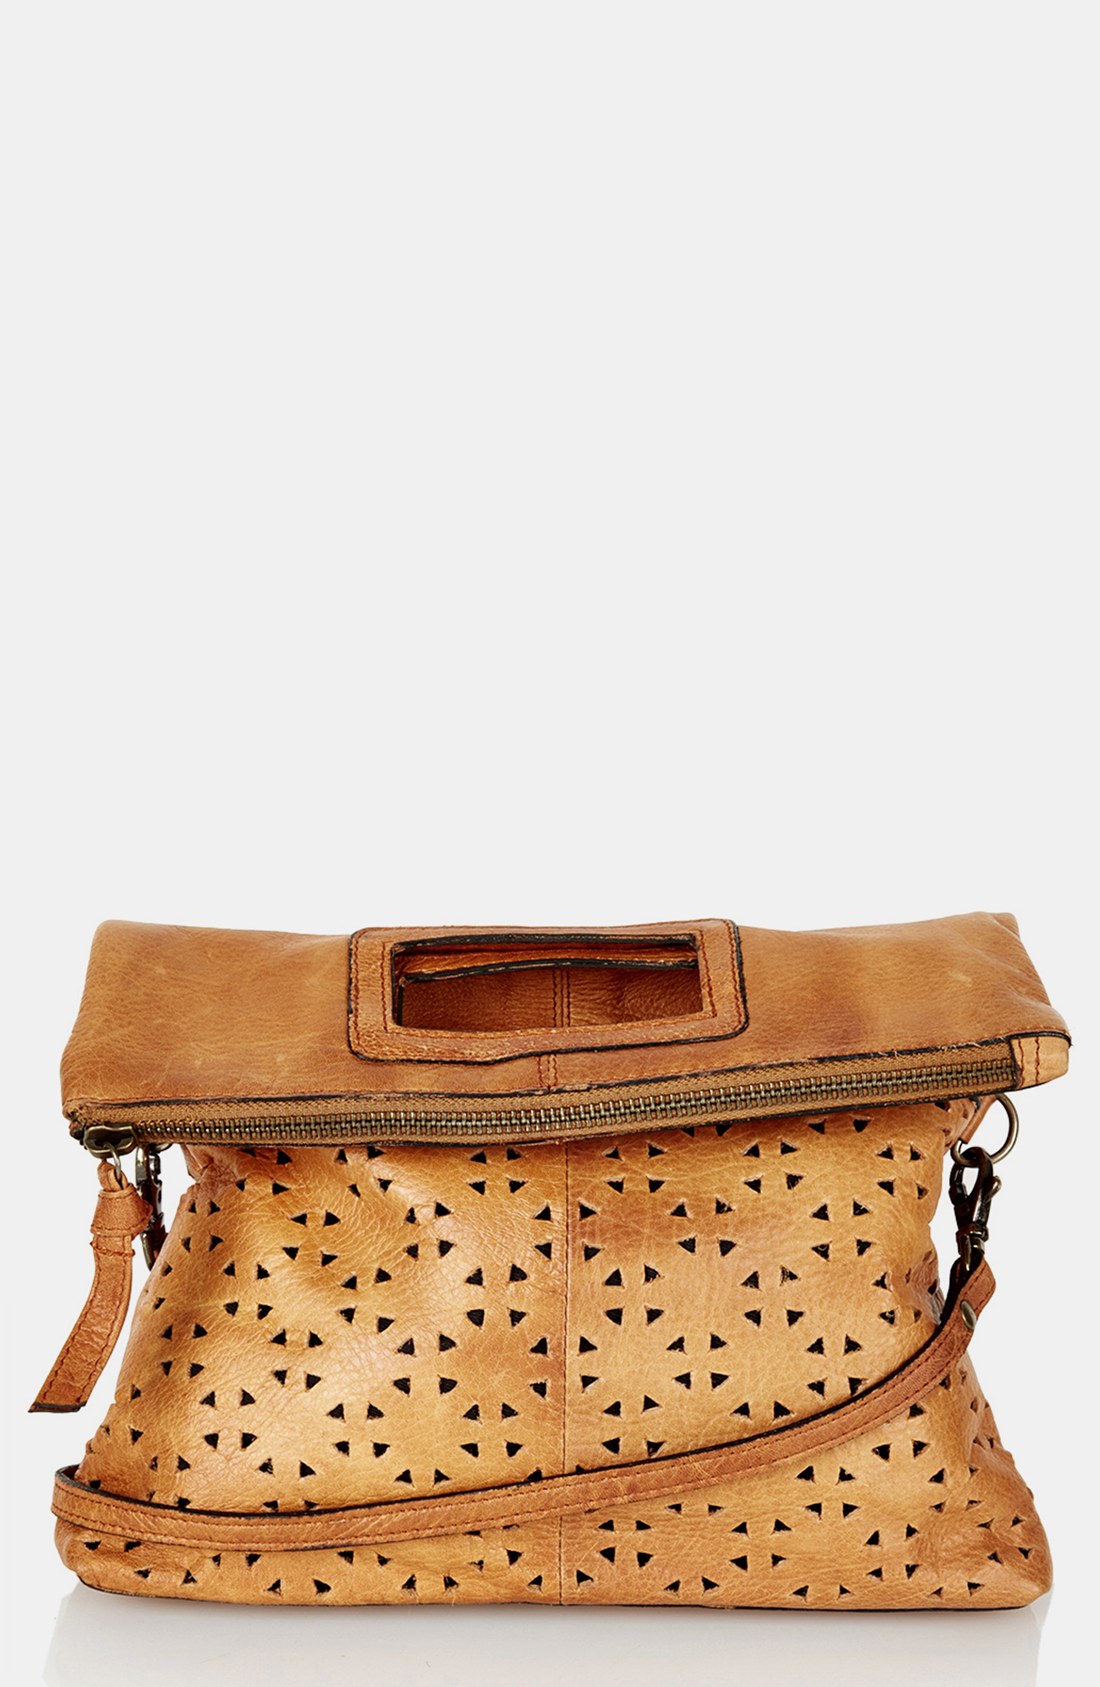 Topshop Perforated Leather Crossbody Bag in Brown (tan)